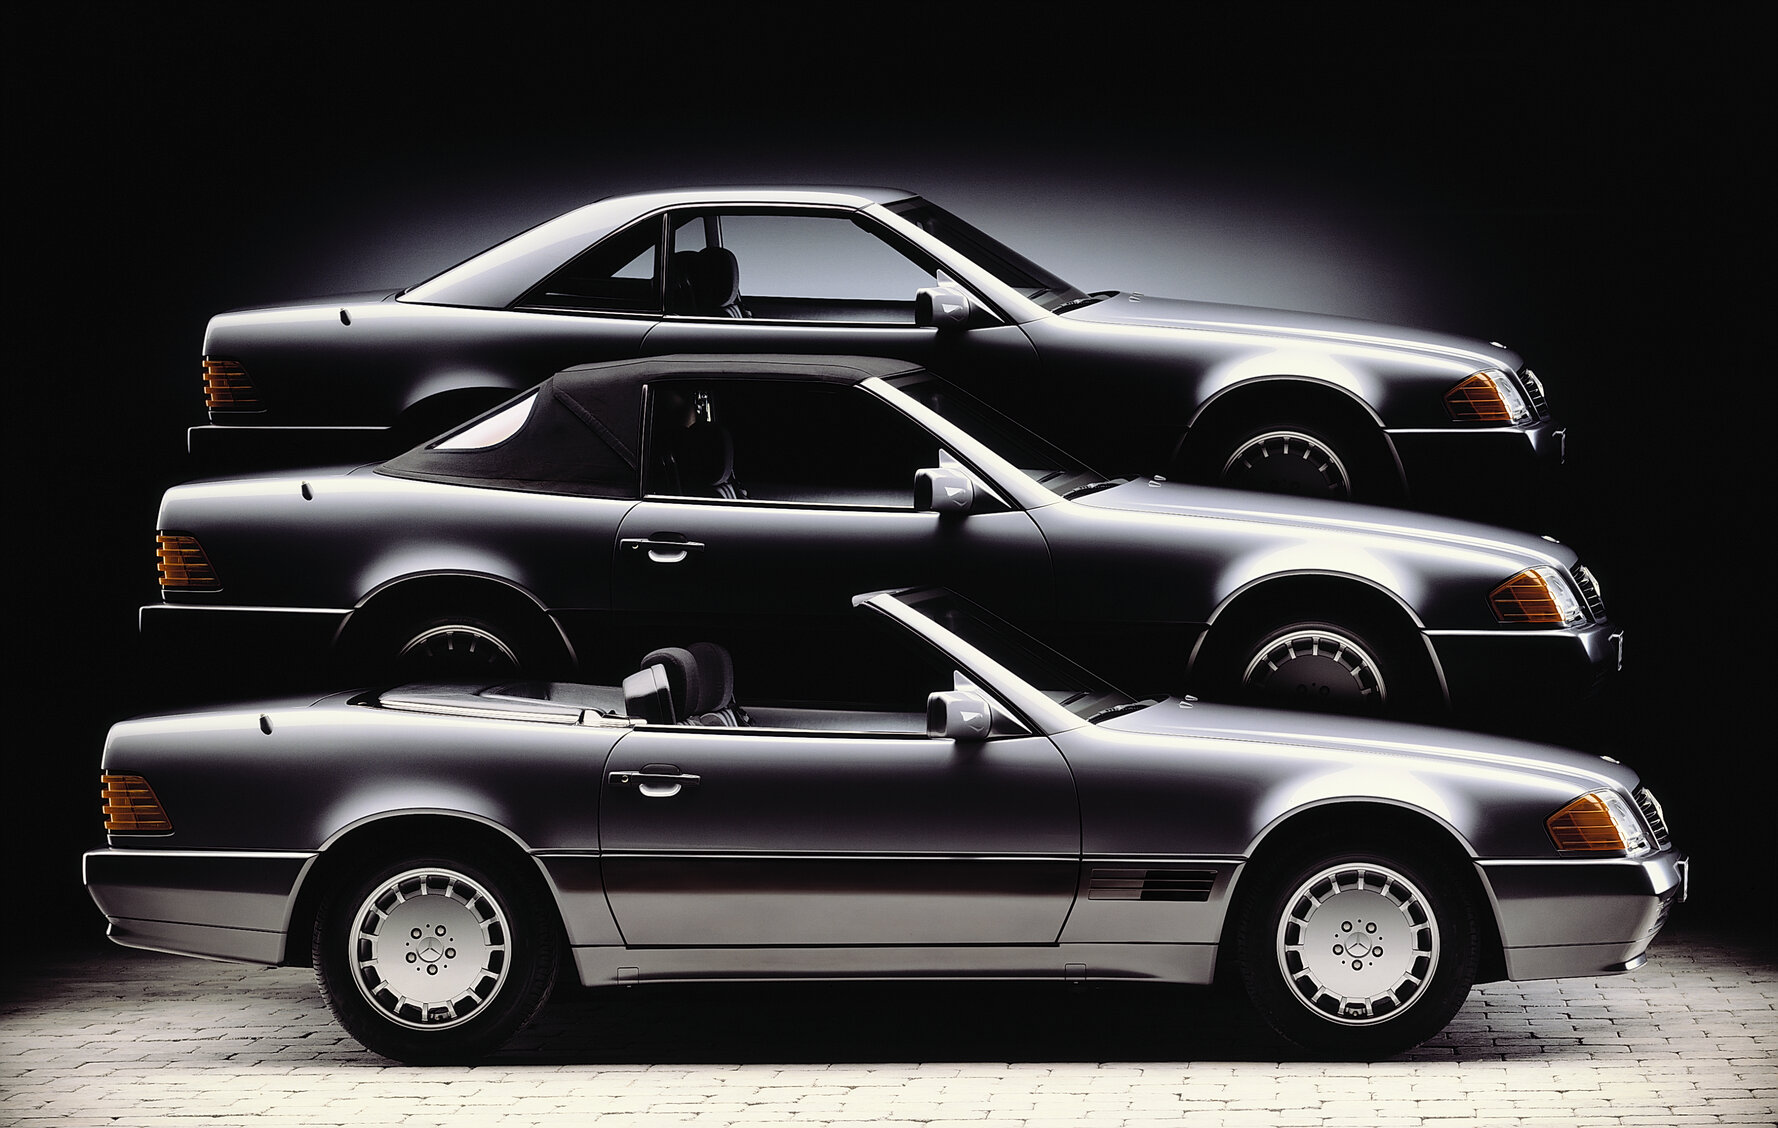 Launch image of the Mercedes-Benz SL (R 129 series, 1989-2001) of 1989.